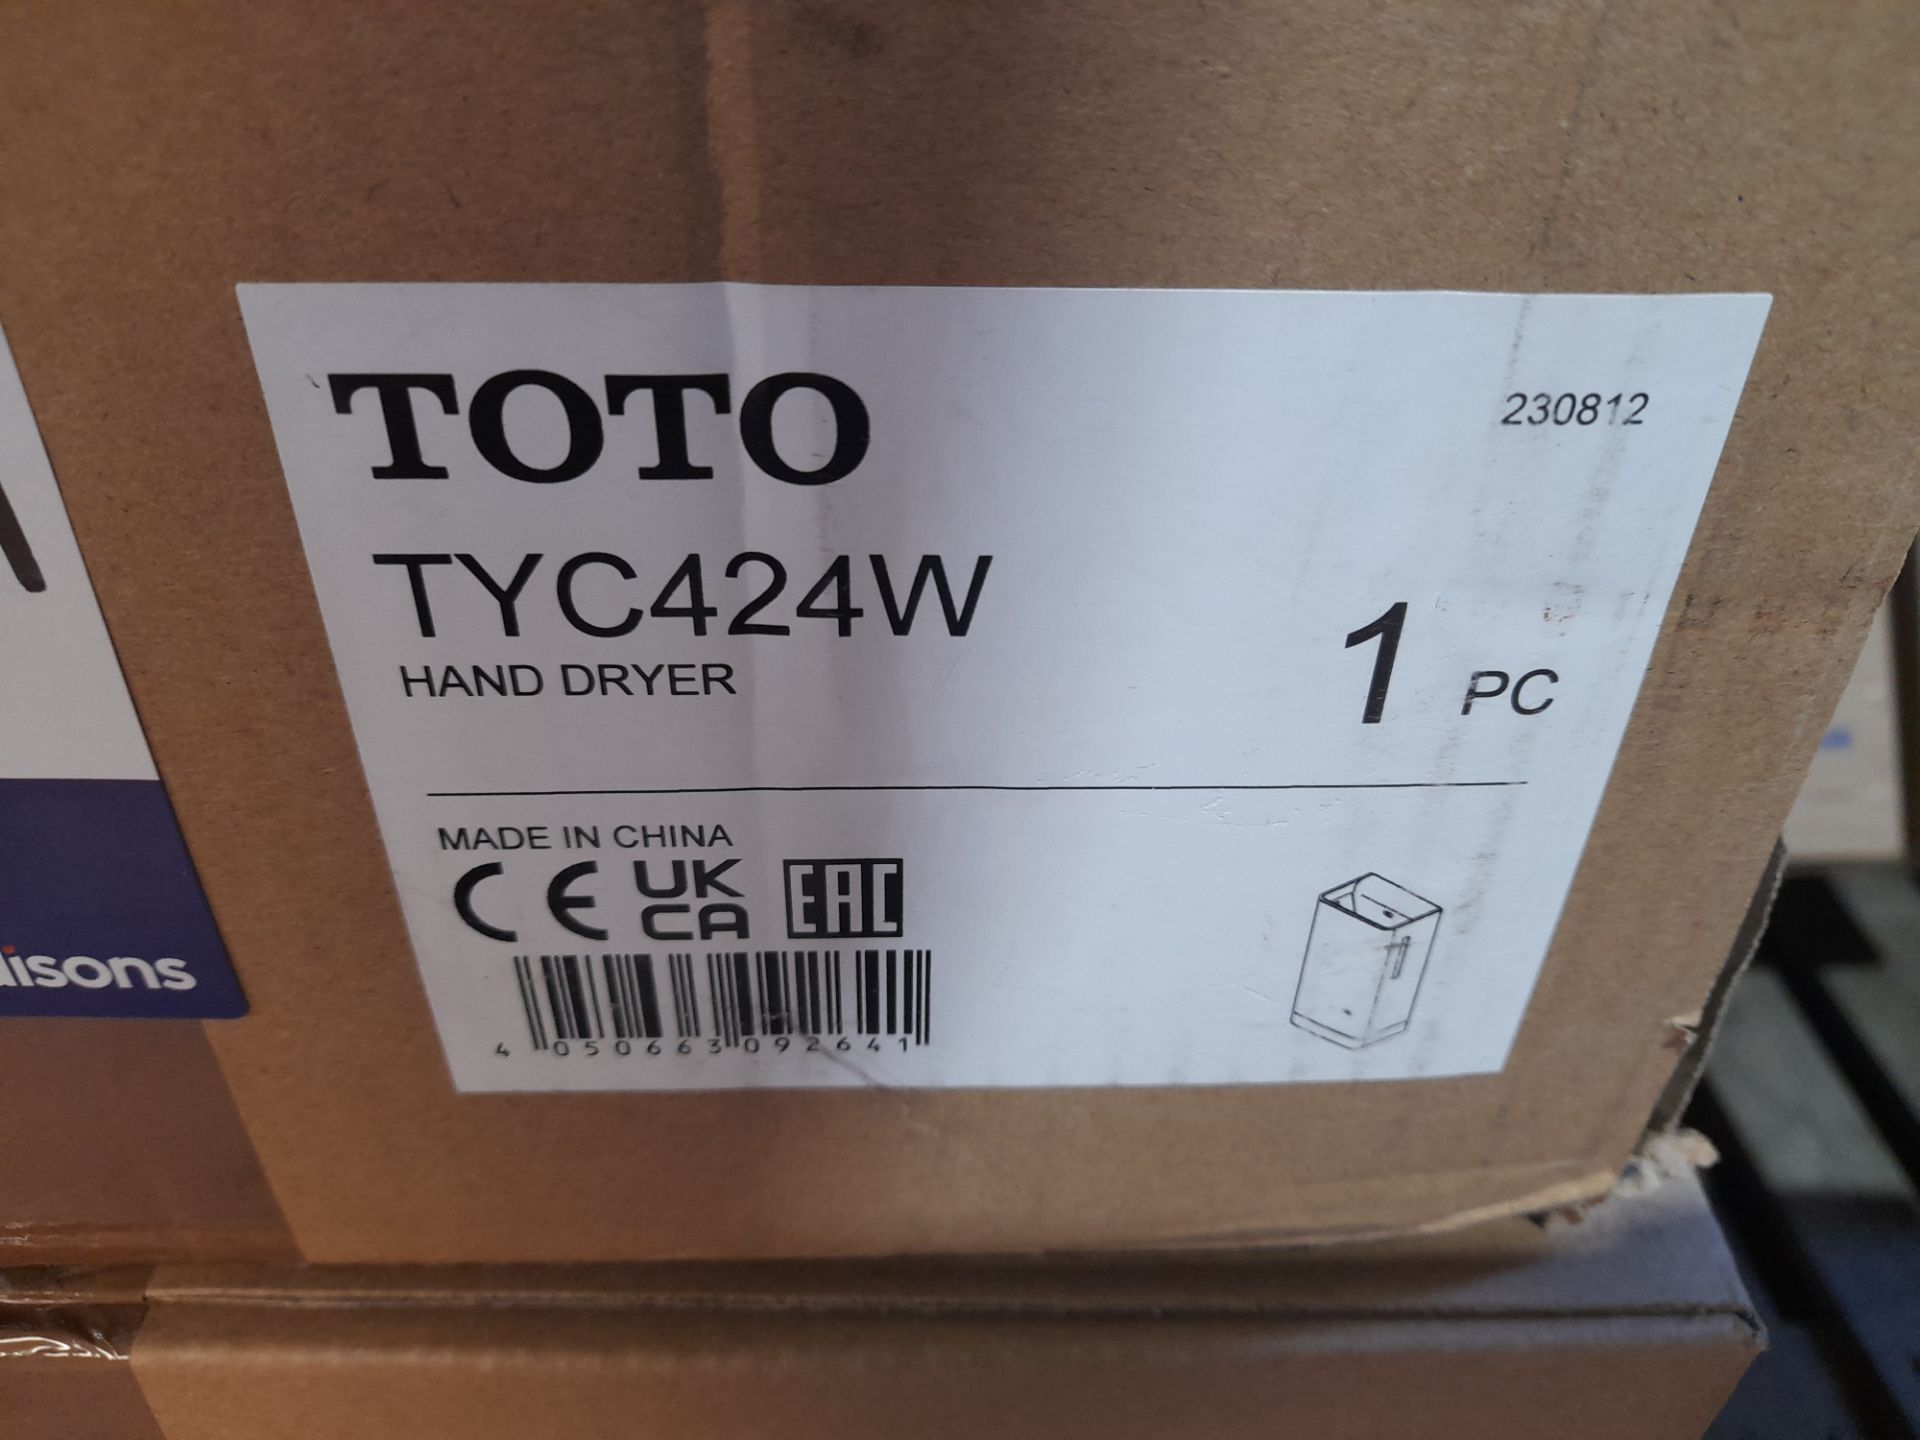 Toto Hand Dryer (TYC424W) - Image 2 of 2